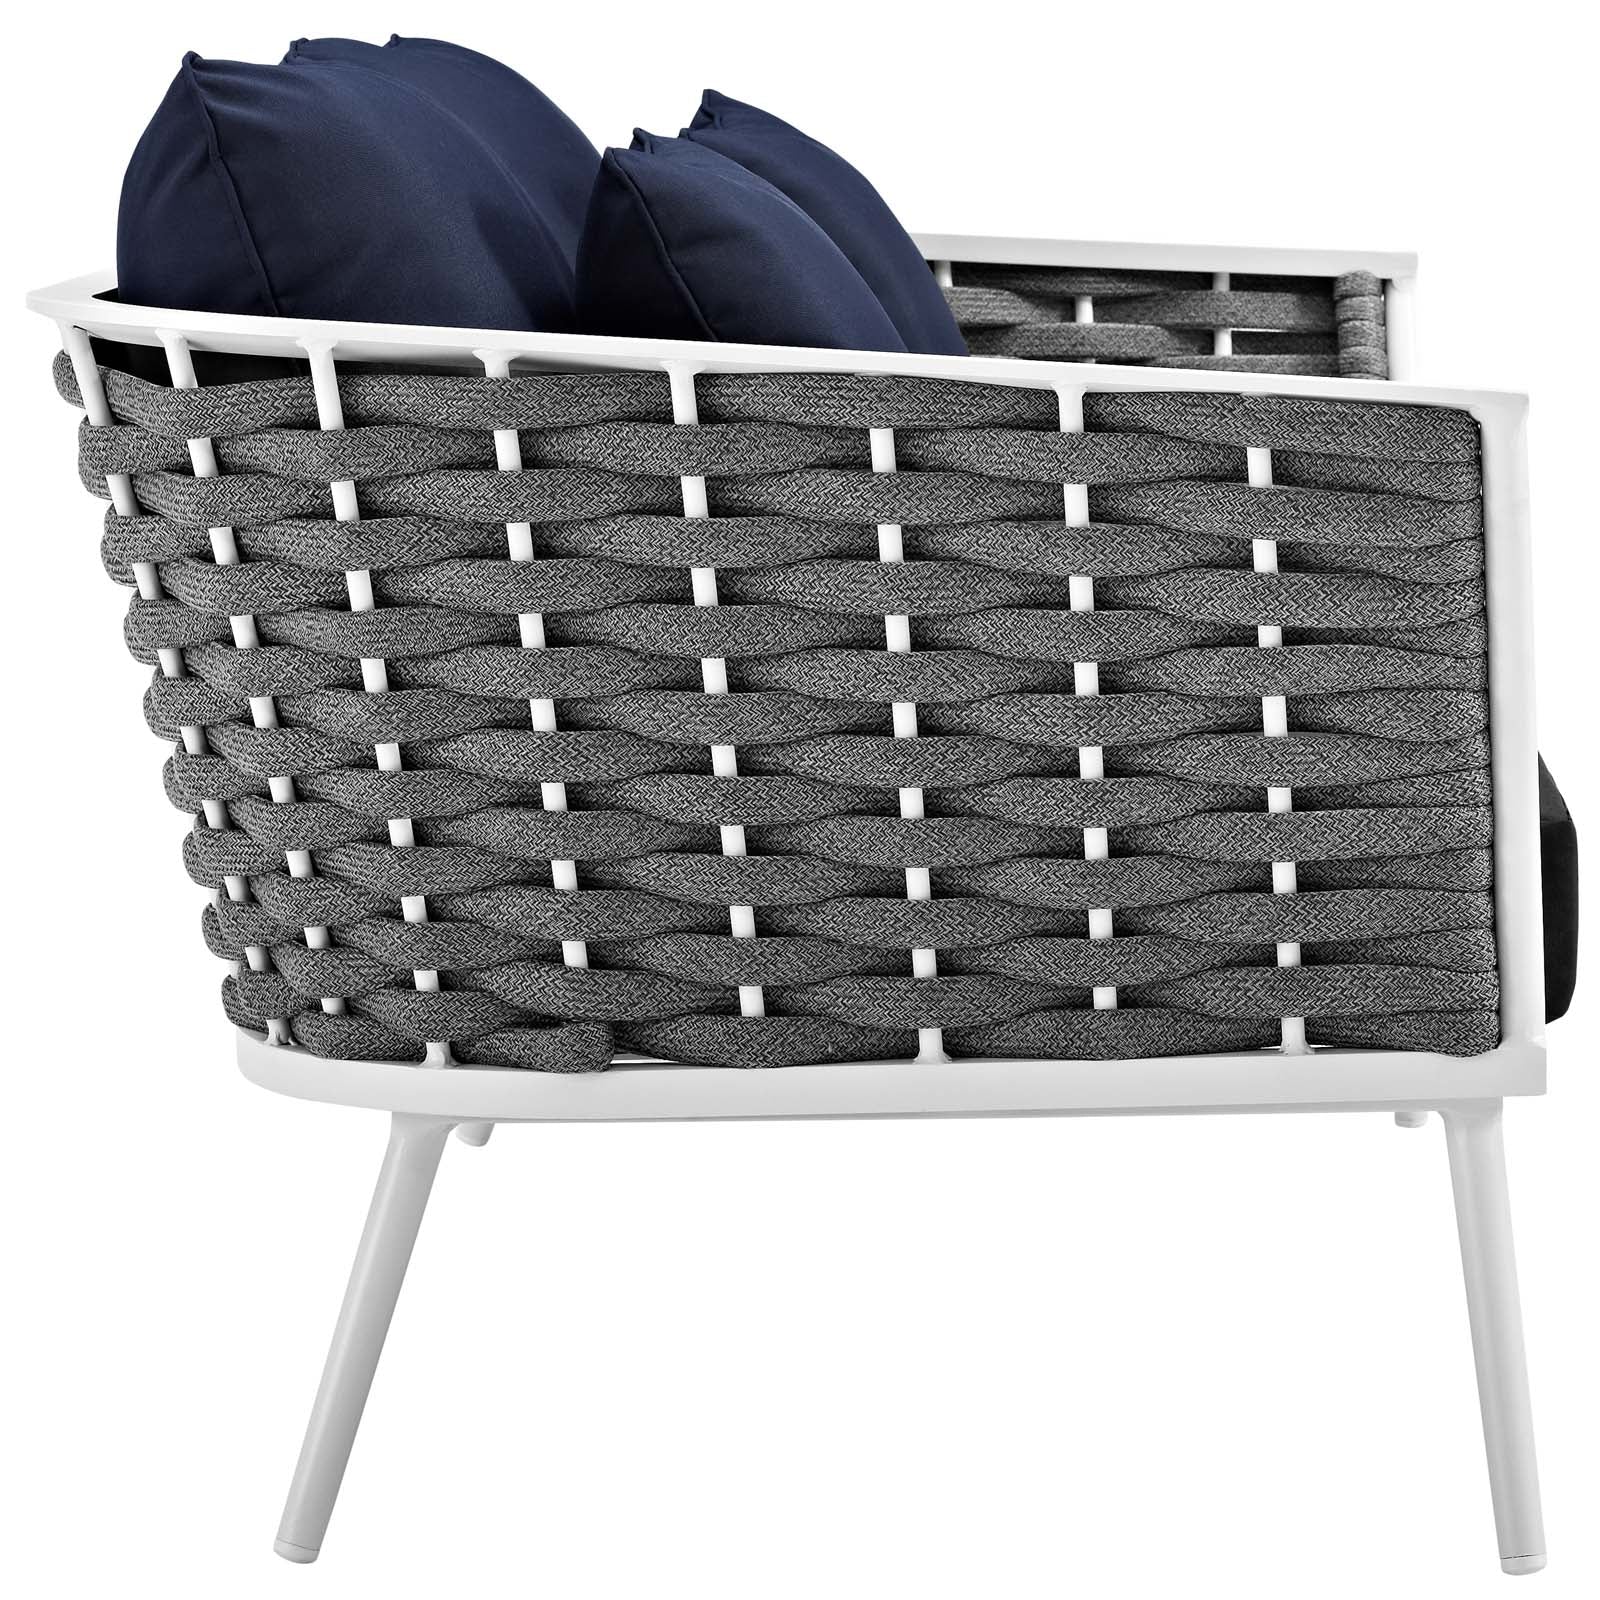 Modway Outdoor Sofas - Stance Outdoor Patio Aluminum Loveseat White Navy